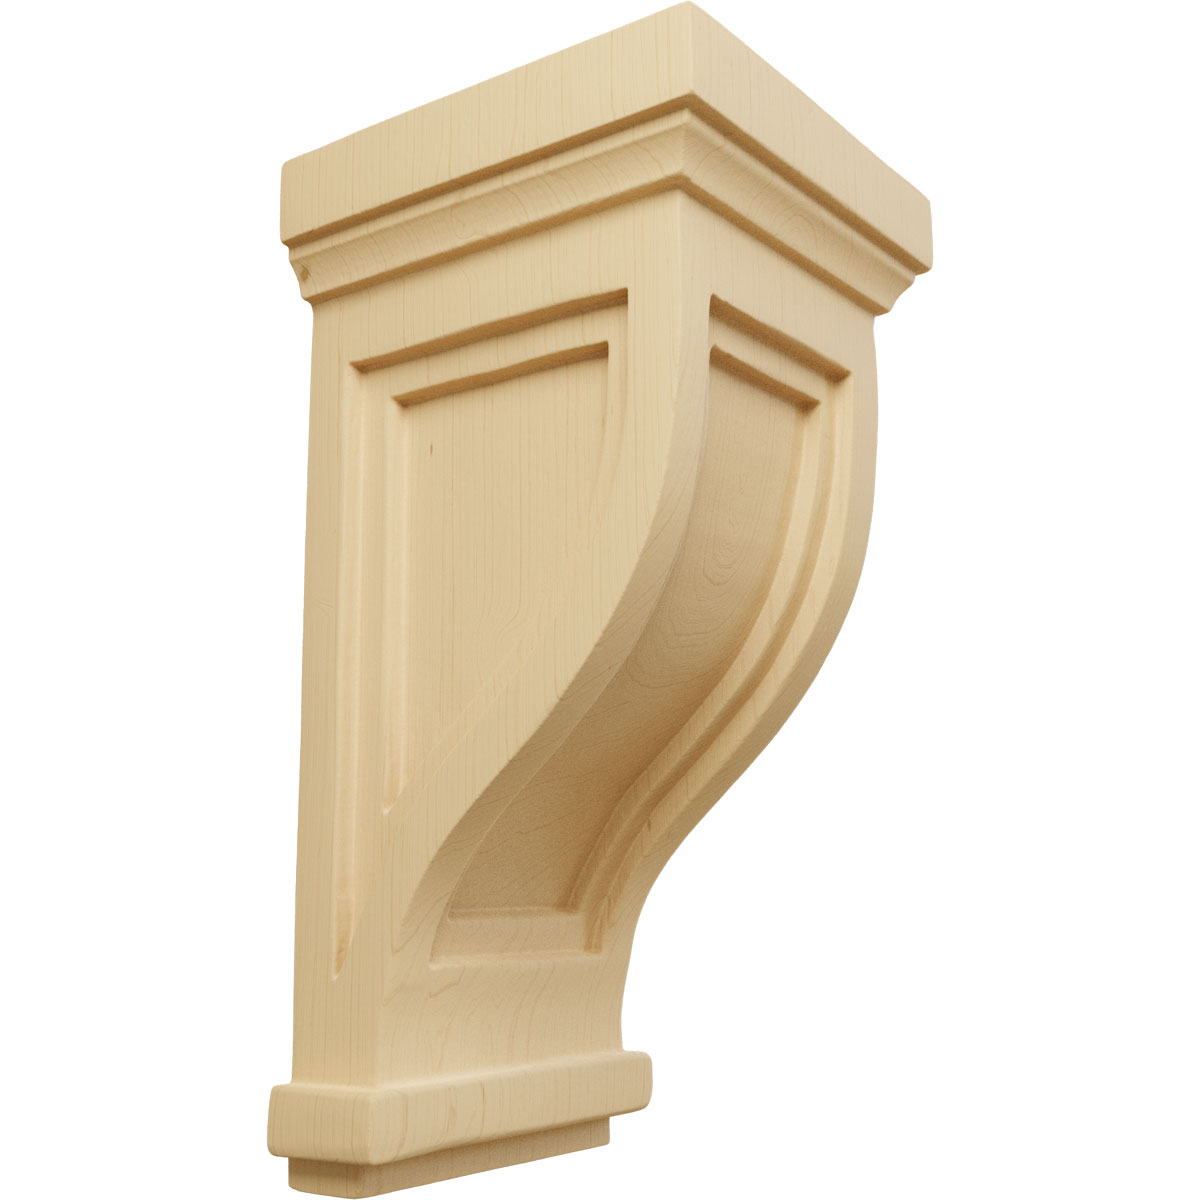 7"H 5"H Linden Wood Traditional Corbel Onlay Hand Carved Red Oak 